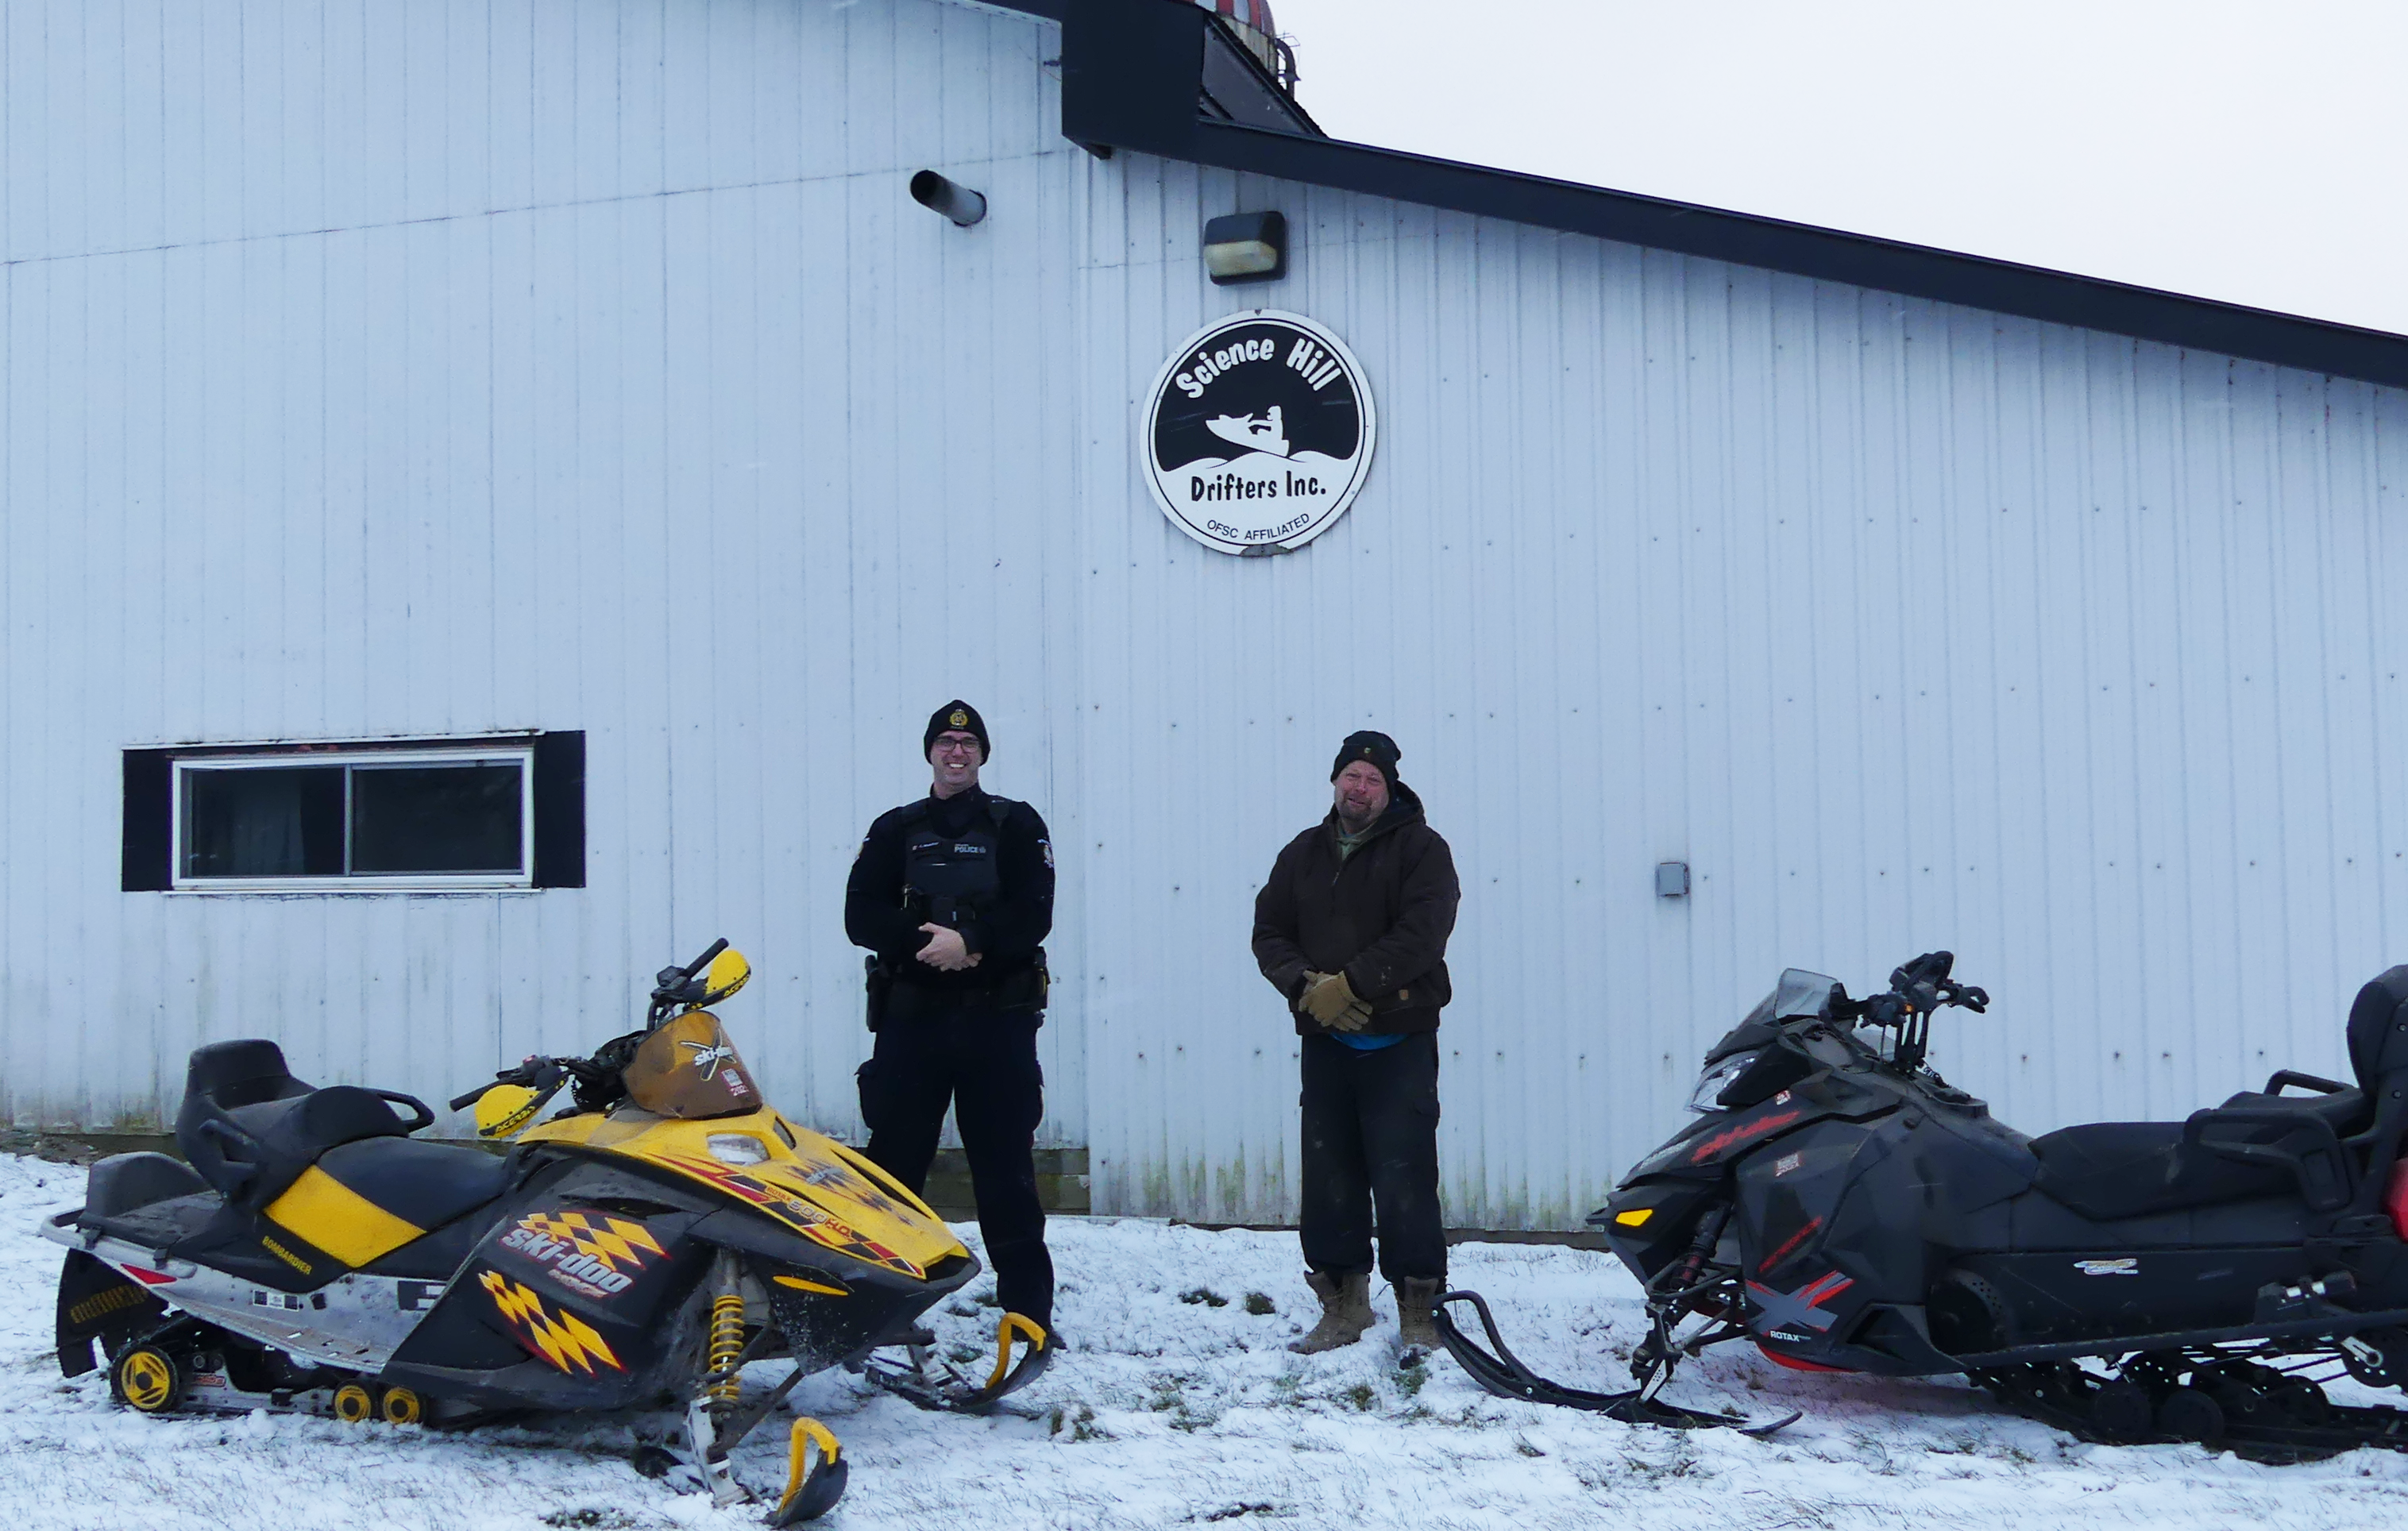 Constable Aaron Mounfield, St. Marys Community Resource Officer has been working with Wayne Flanigan, President of the Science Hill Drifters Snowmobile Club to help promote safe snowmobiling practices in and around St. Marys. 